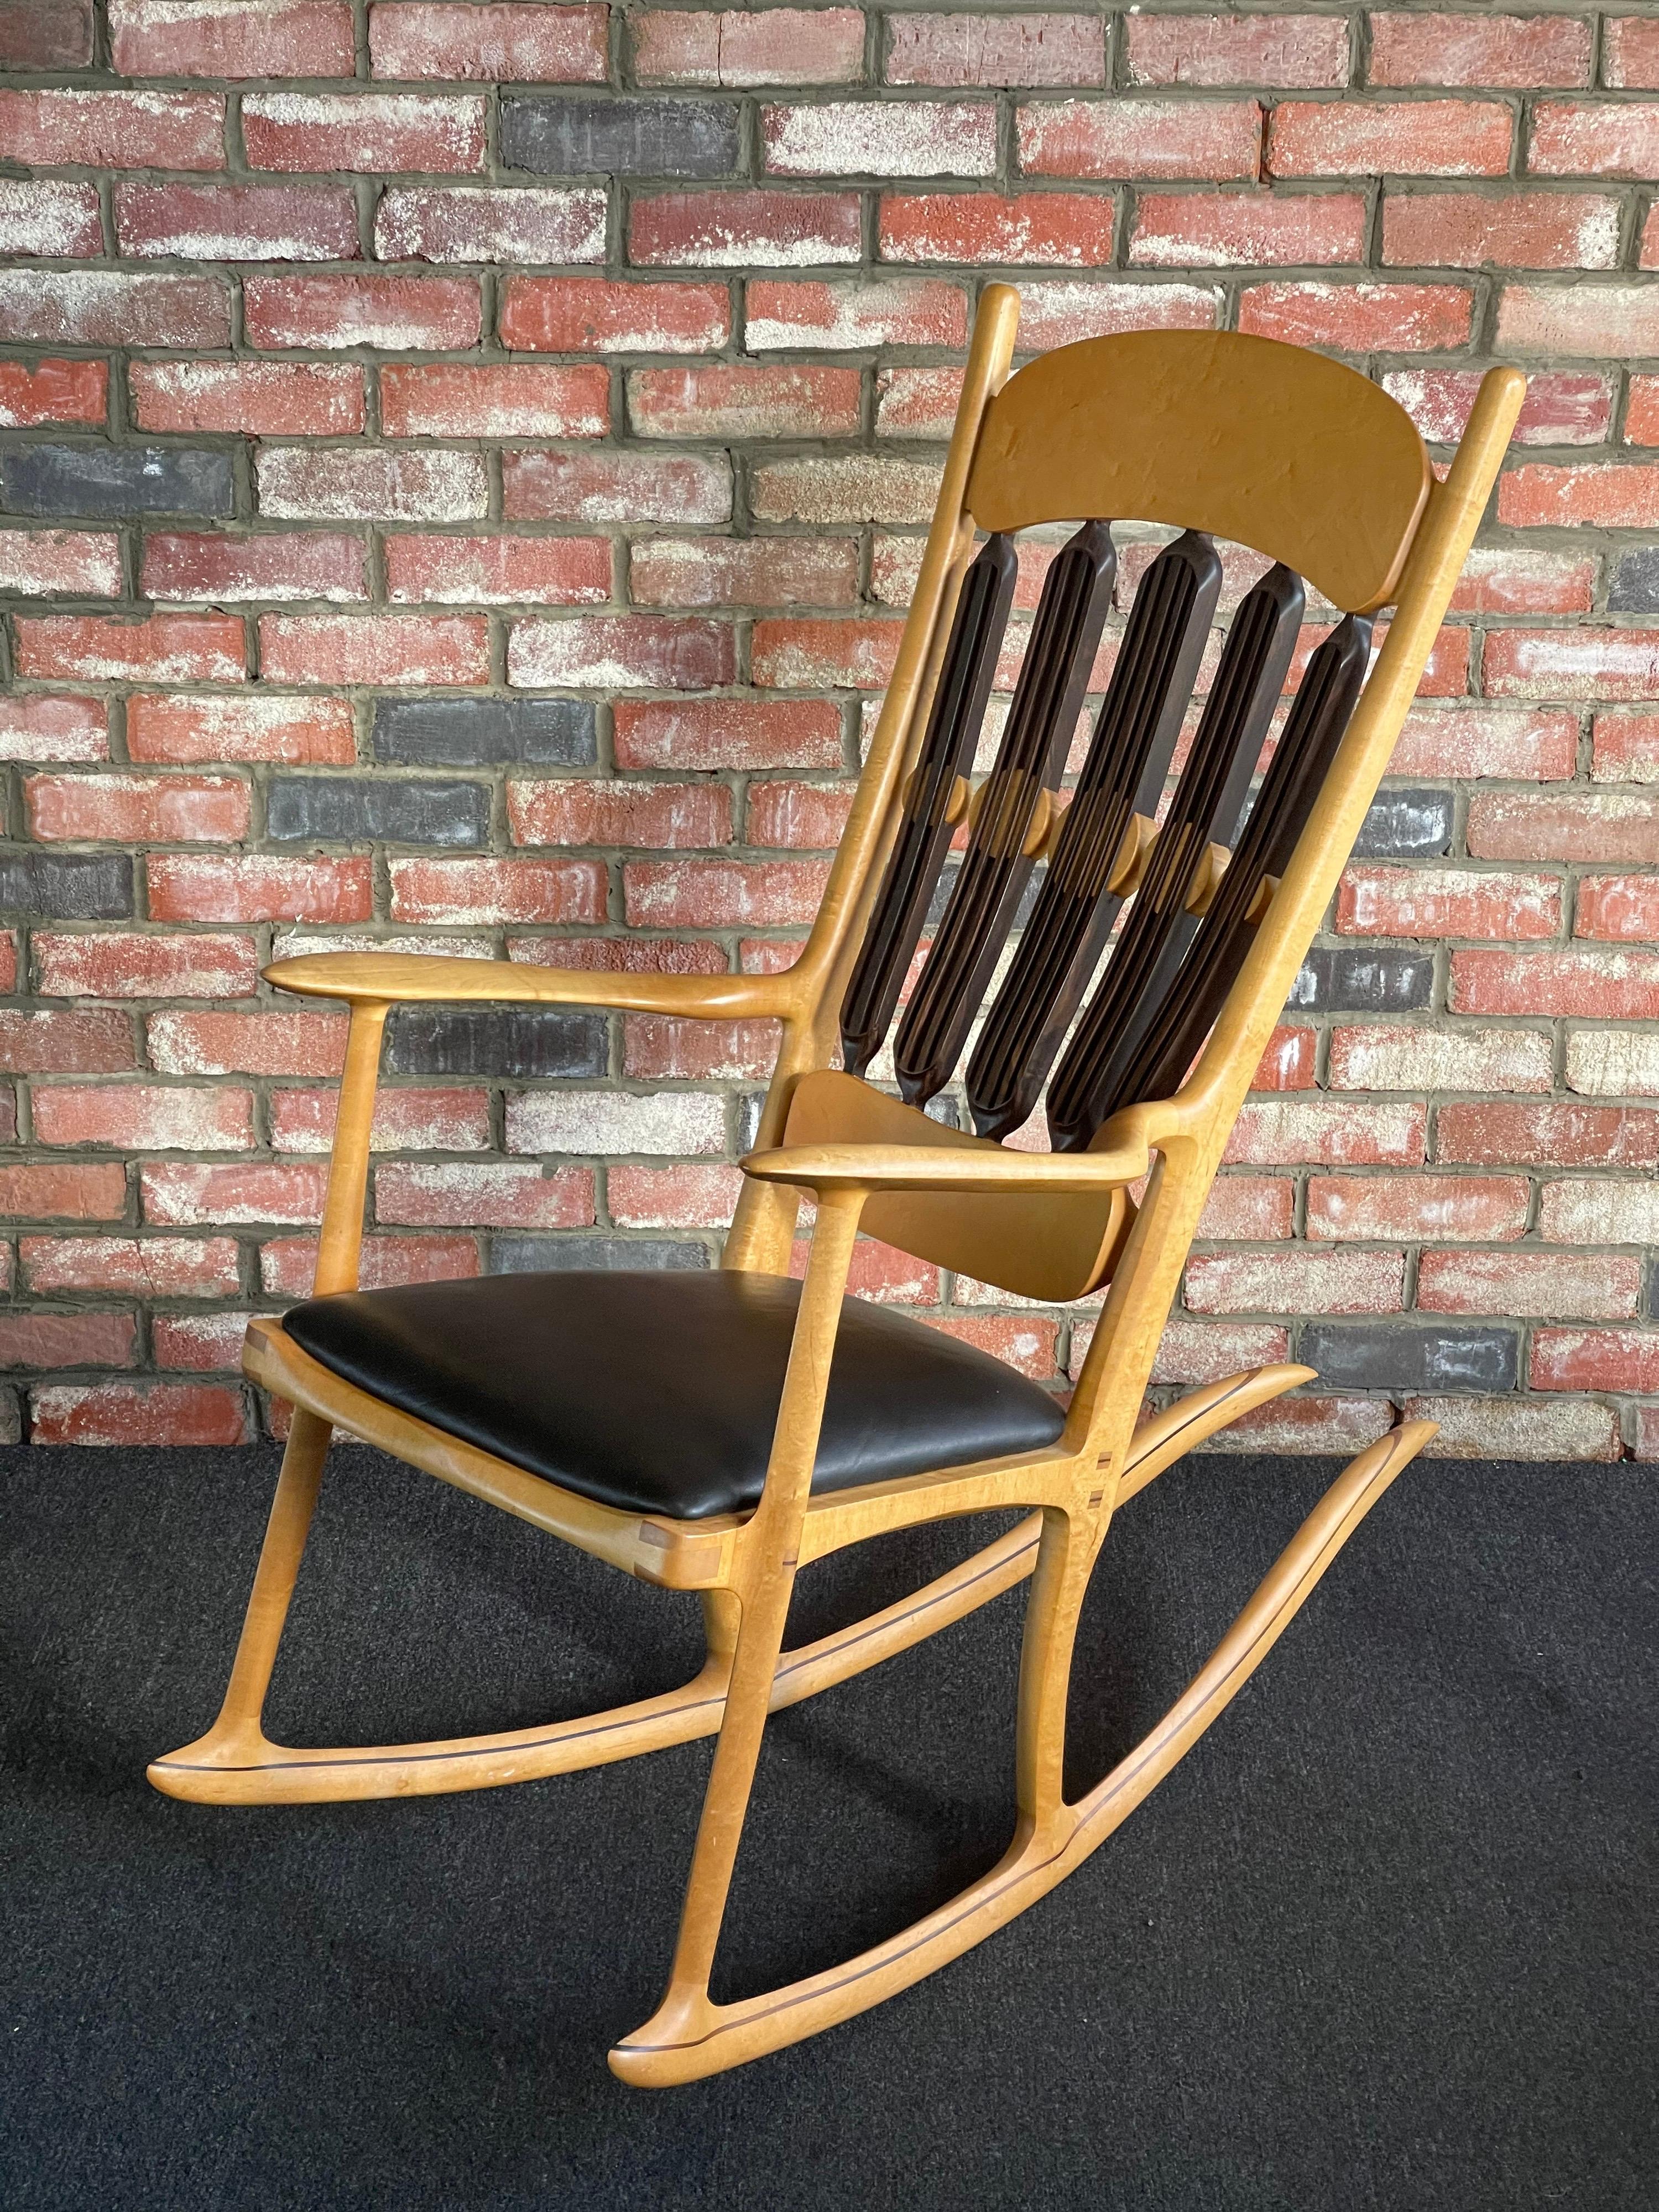 Gorgeous handcrafted artisan studio rocking chair by Jeffry Mann, circa 1987. This American made classic has a birds-eye maple frame with black walnut back spindles and striping; the seat is upholstered in black leather. The piece is an absolute